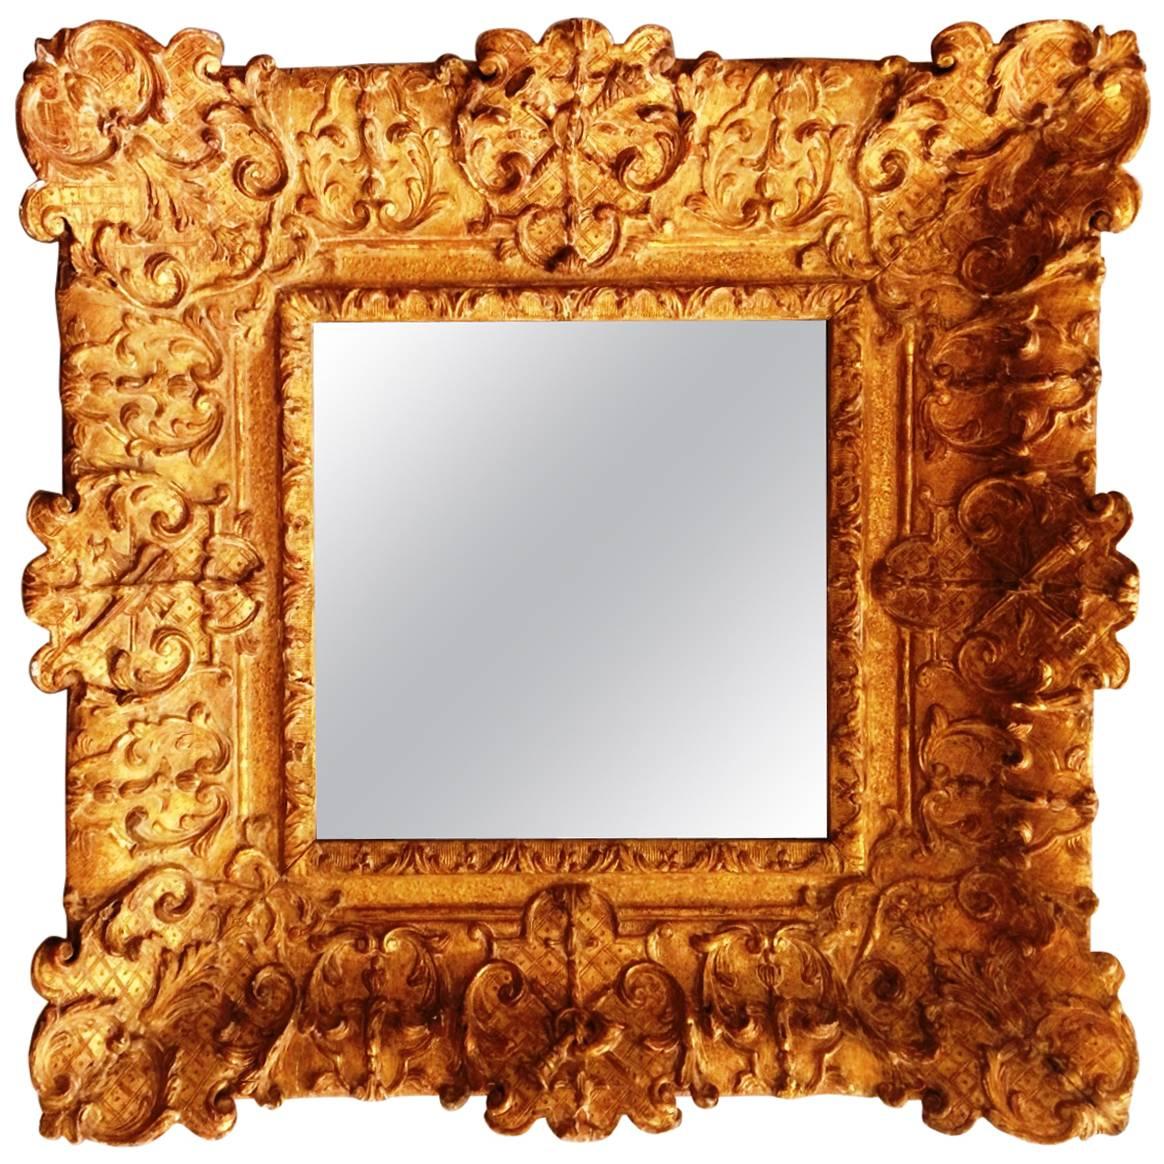 Fabulous Louis XIV Period Frame Mounted as Mirror, France, Early 18th Century